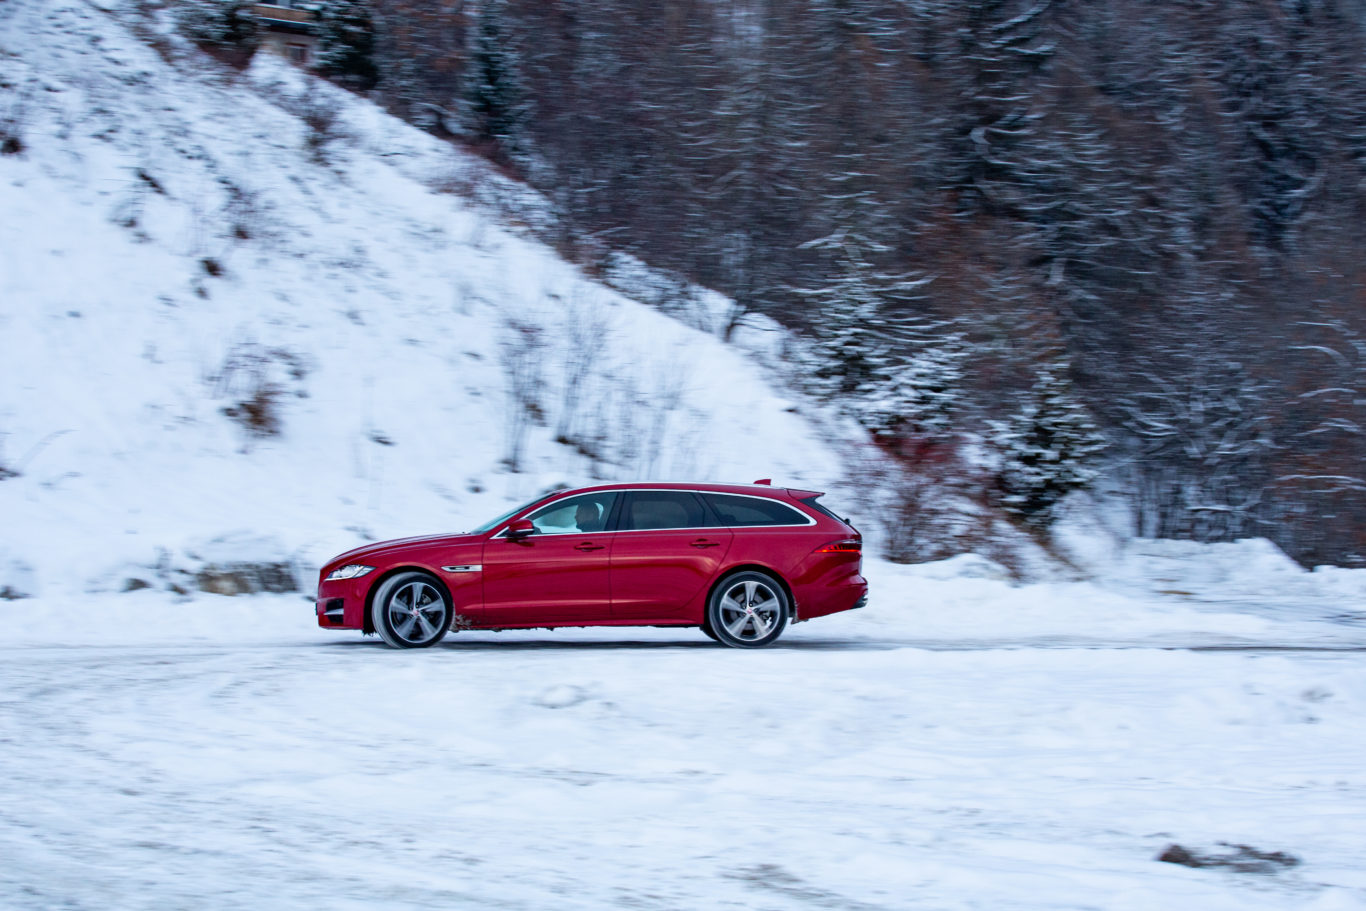 The Sportbrake offers more practicality than the regular XF